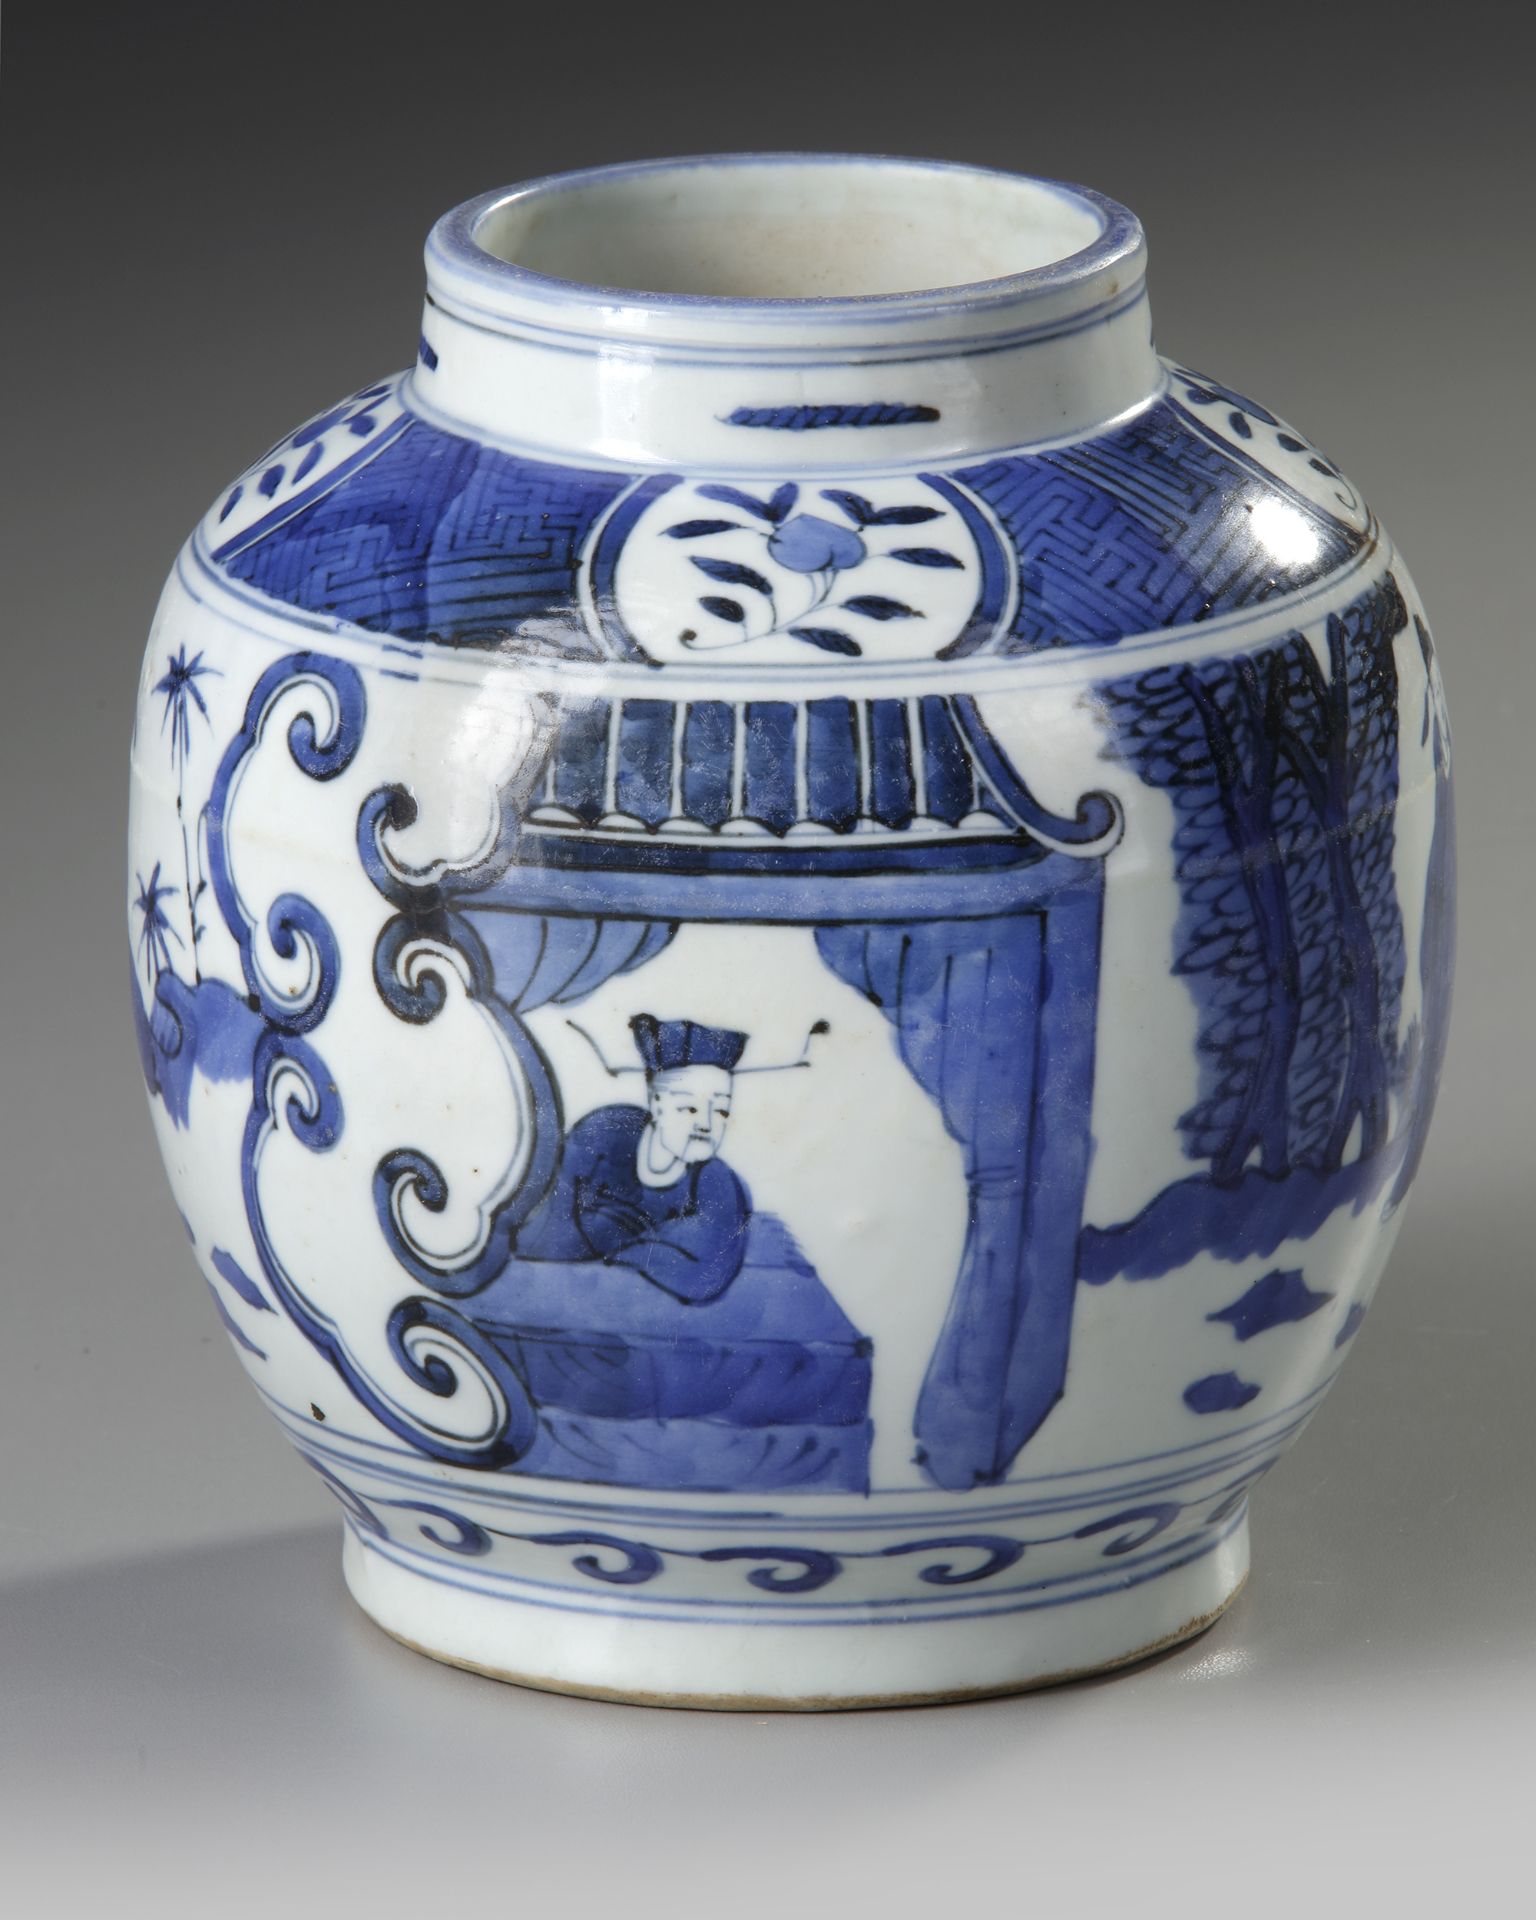 A CHINESE BLUE AND WHITE JAR, MING DYNASTY (1368-1644) OR LATER - Image 3 of 8